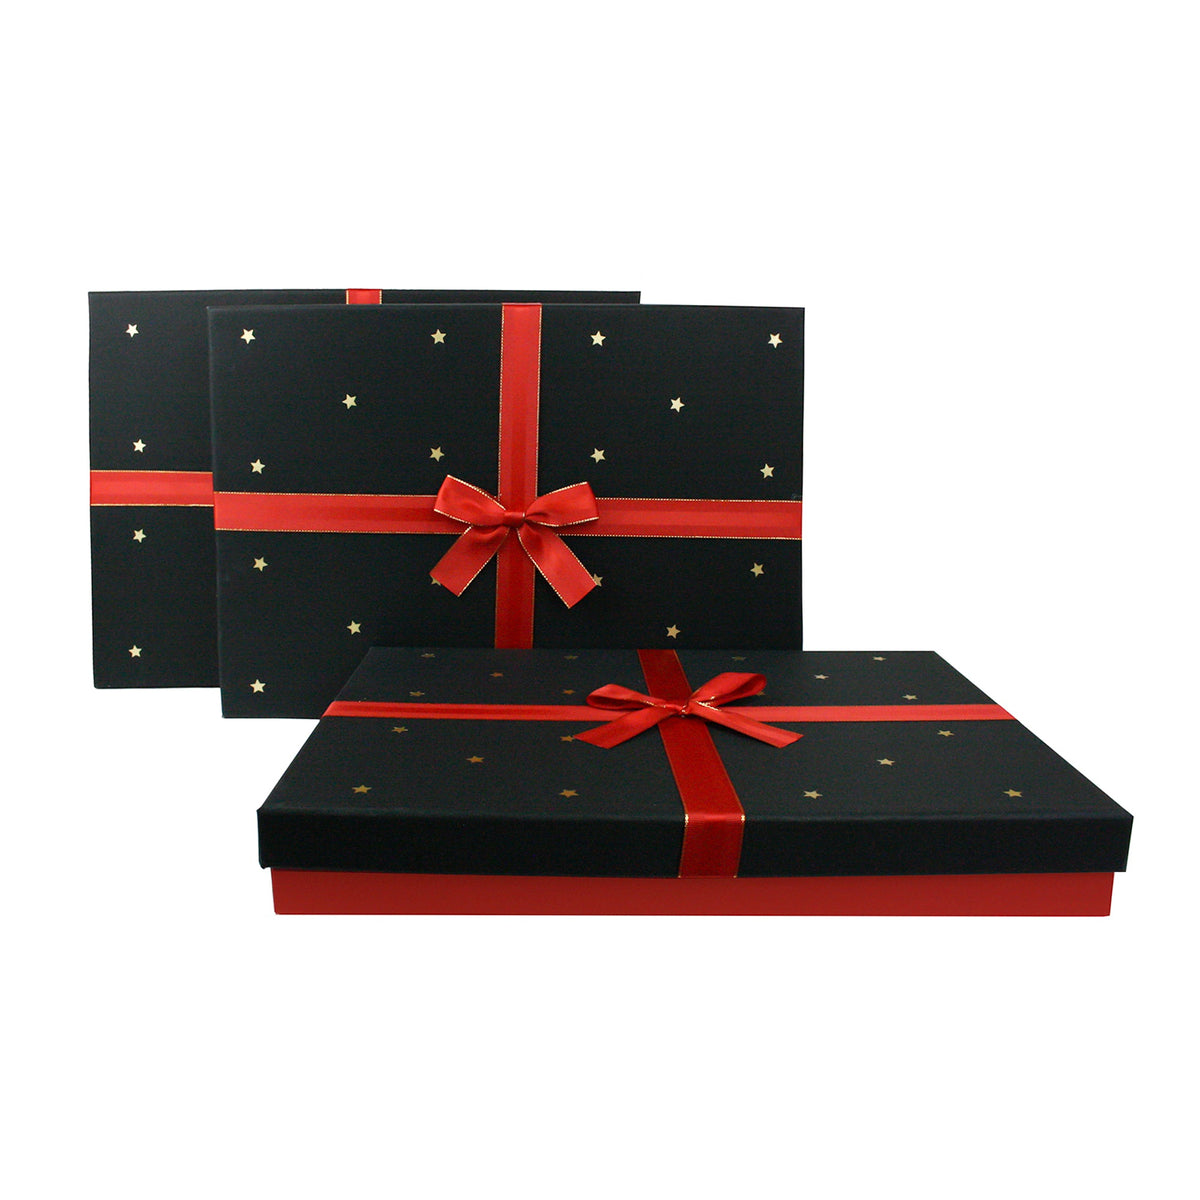 Set of 3 Red Black Gift Boxes